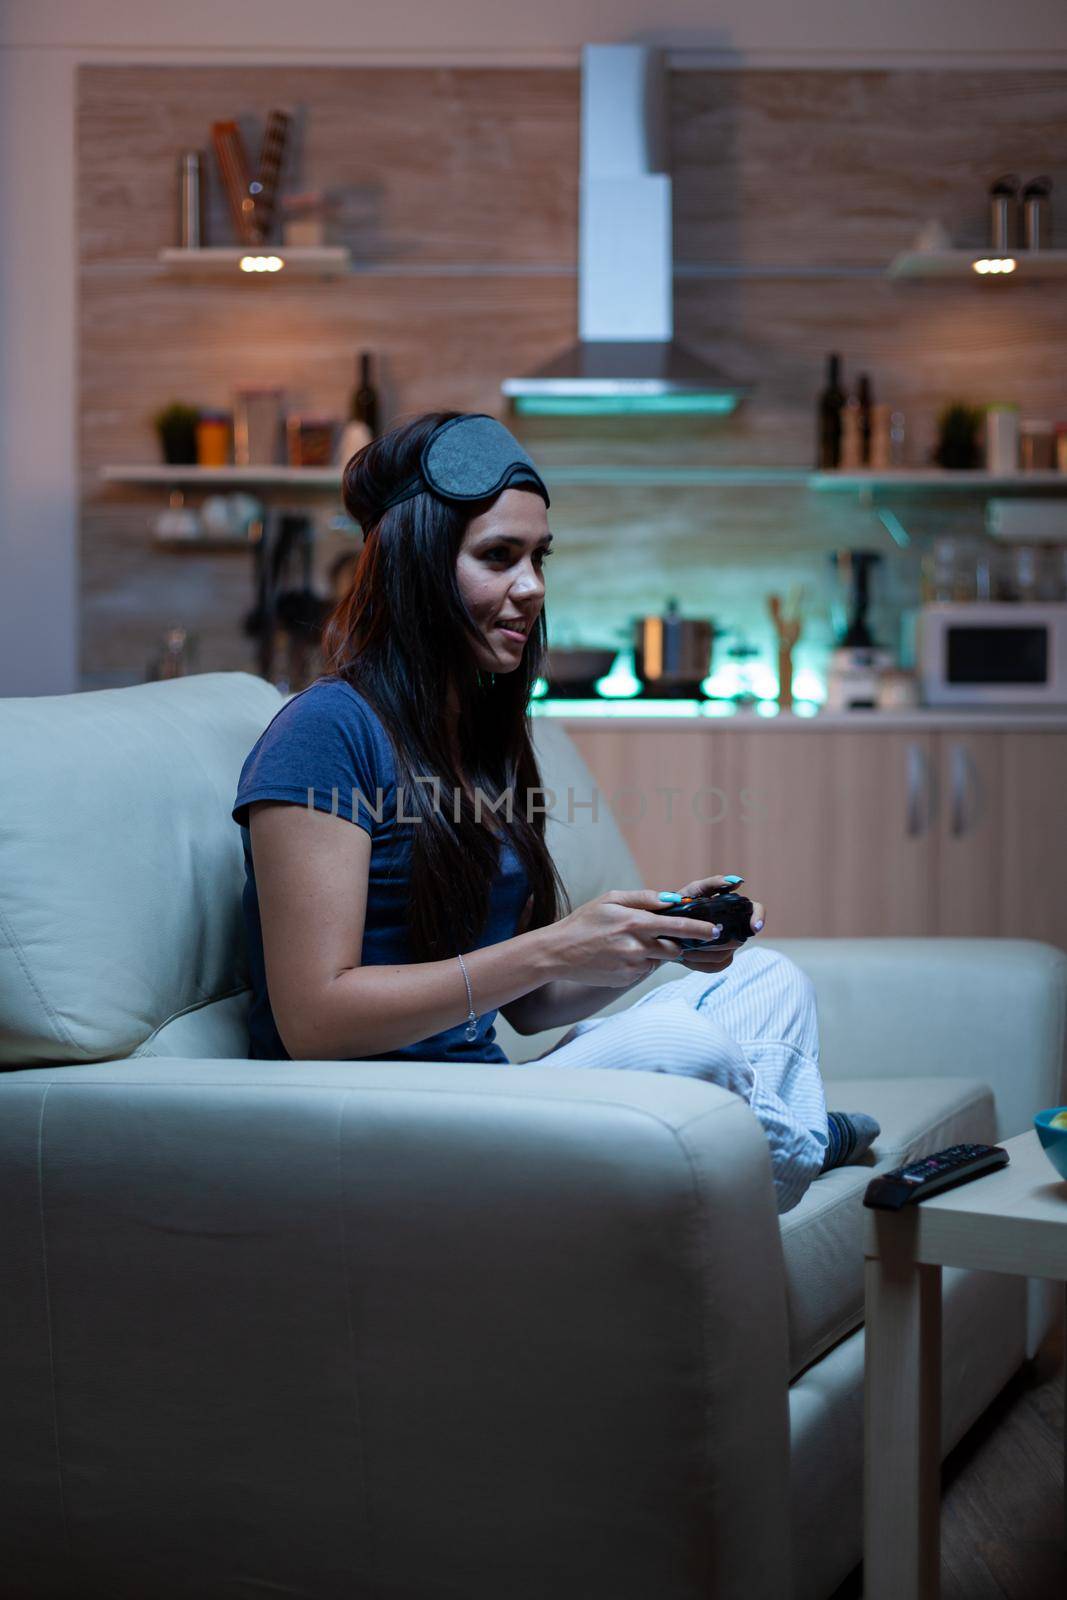 Gamer woman playing video games on console using controller and joysticks sitting on couch in front of TV. Excited determined person relaxing gaming with wireless controller having fun winning